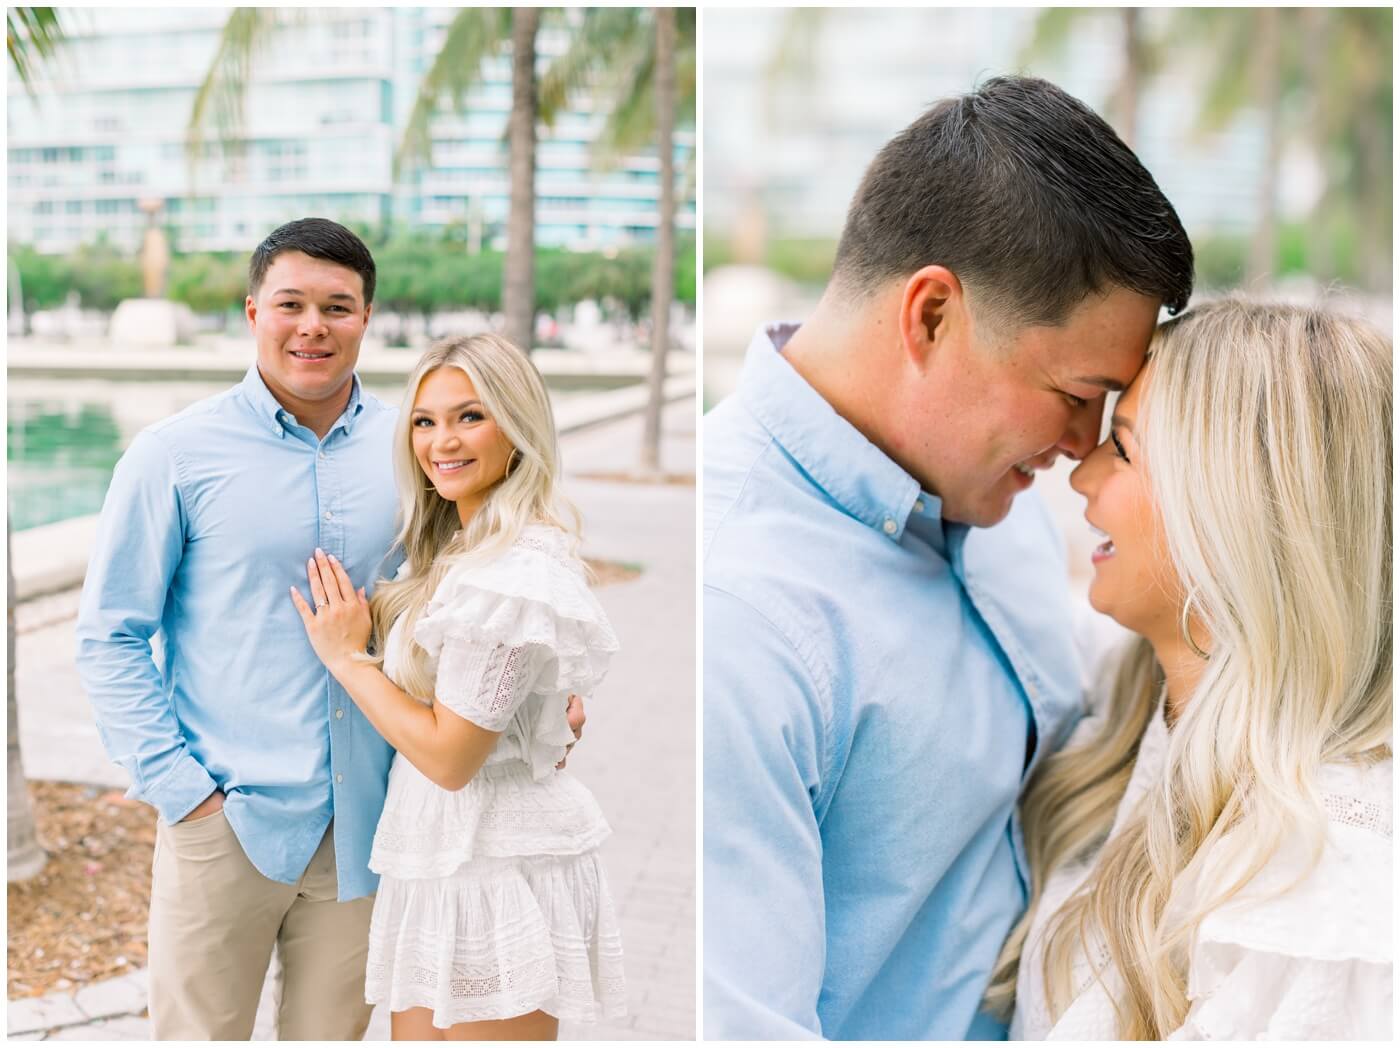 Wedding photographer in Miami | Couple smiles together in downtown Miami